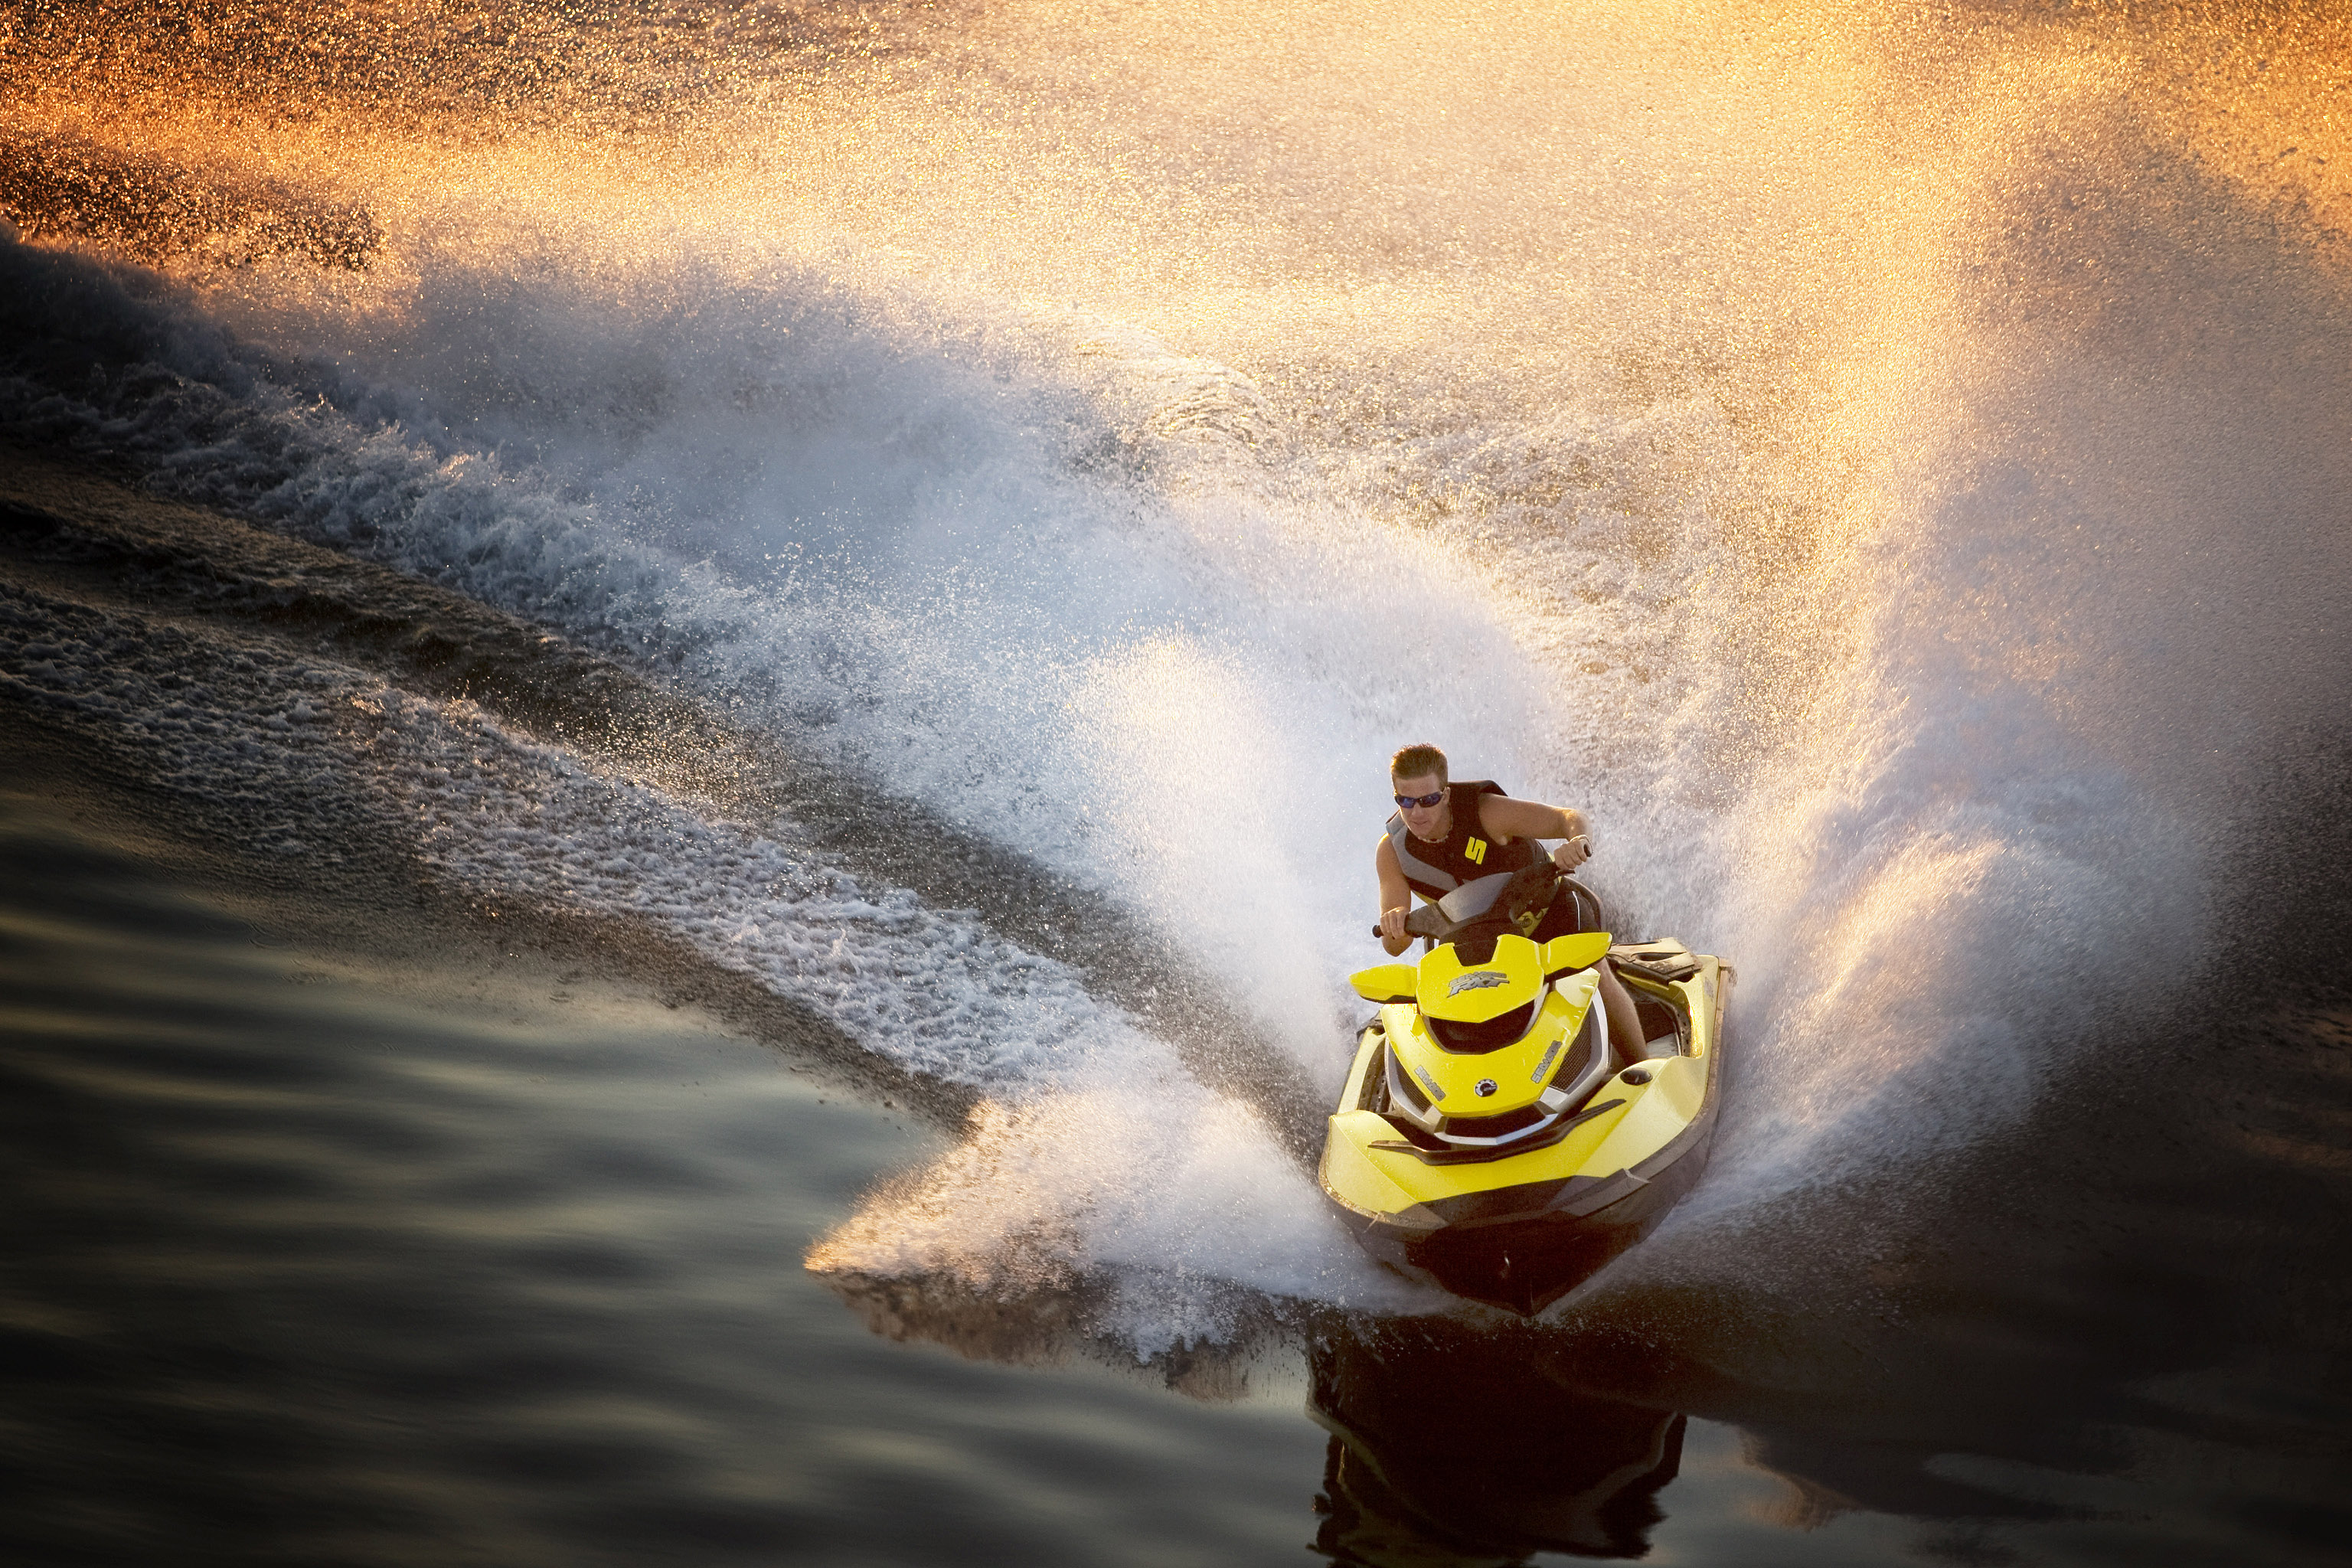 Sea-Doo maker BRP Inc. to launch IPO